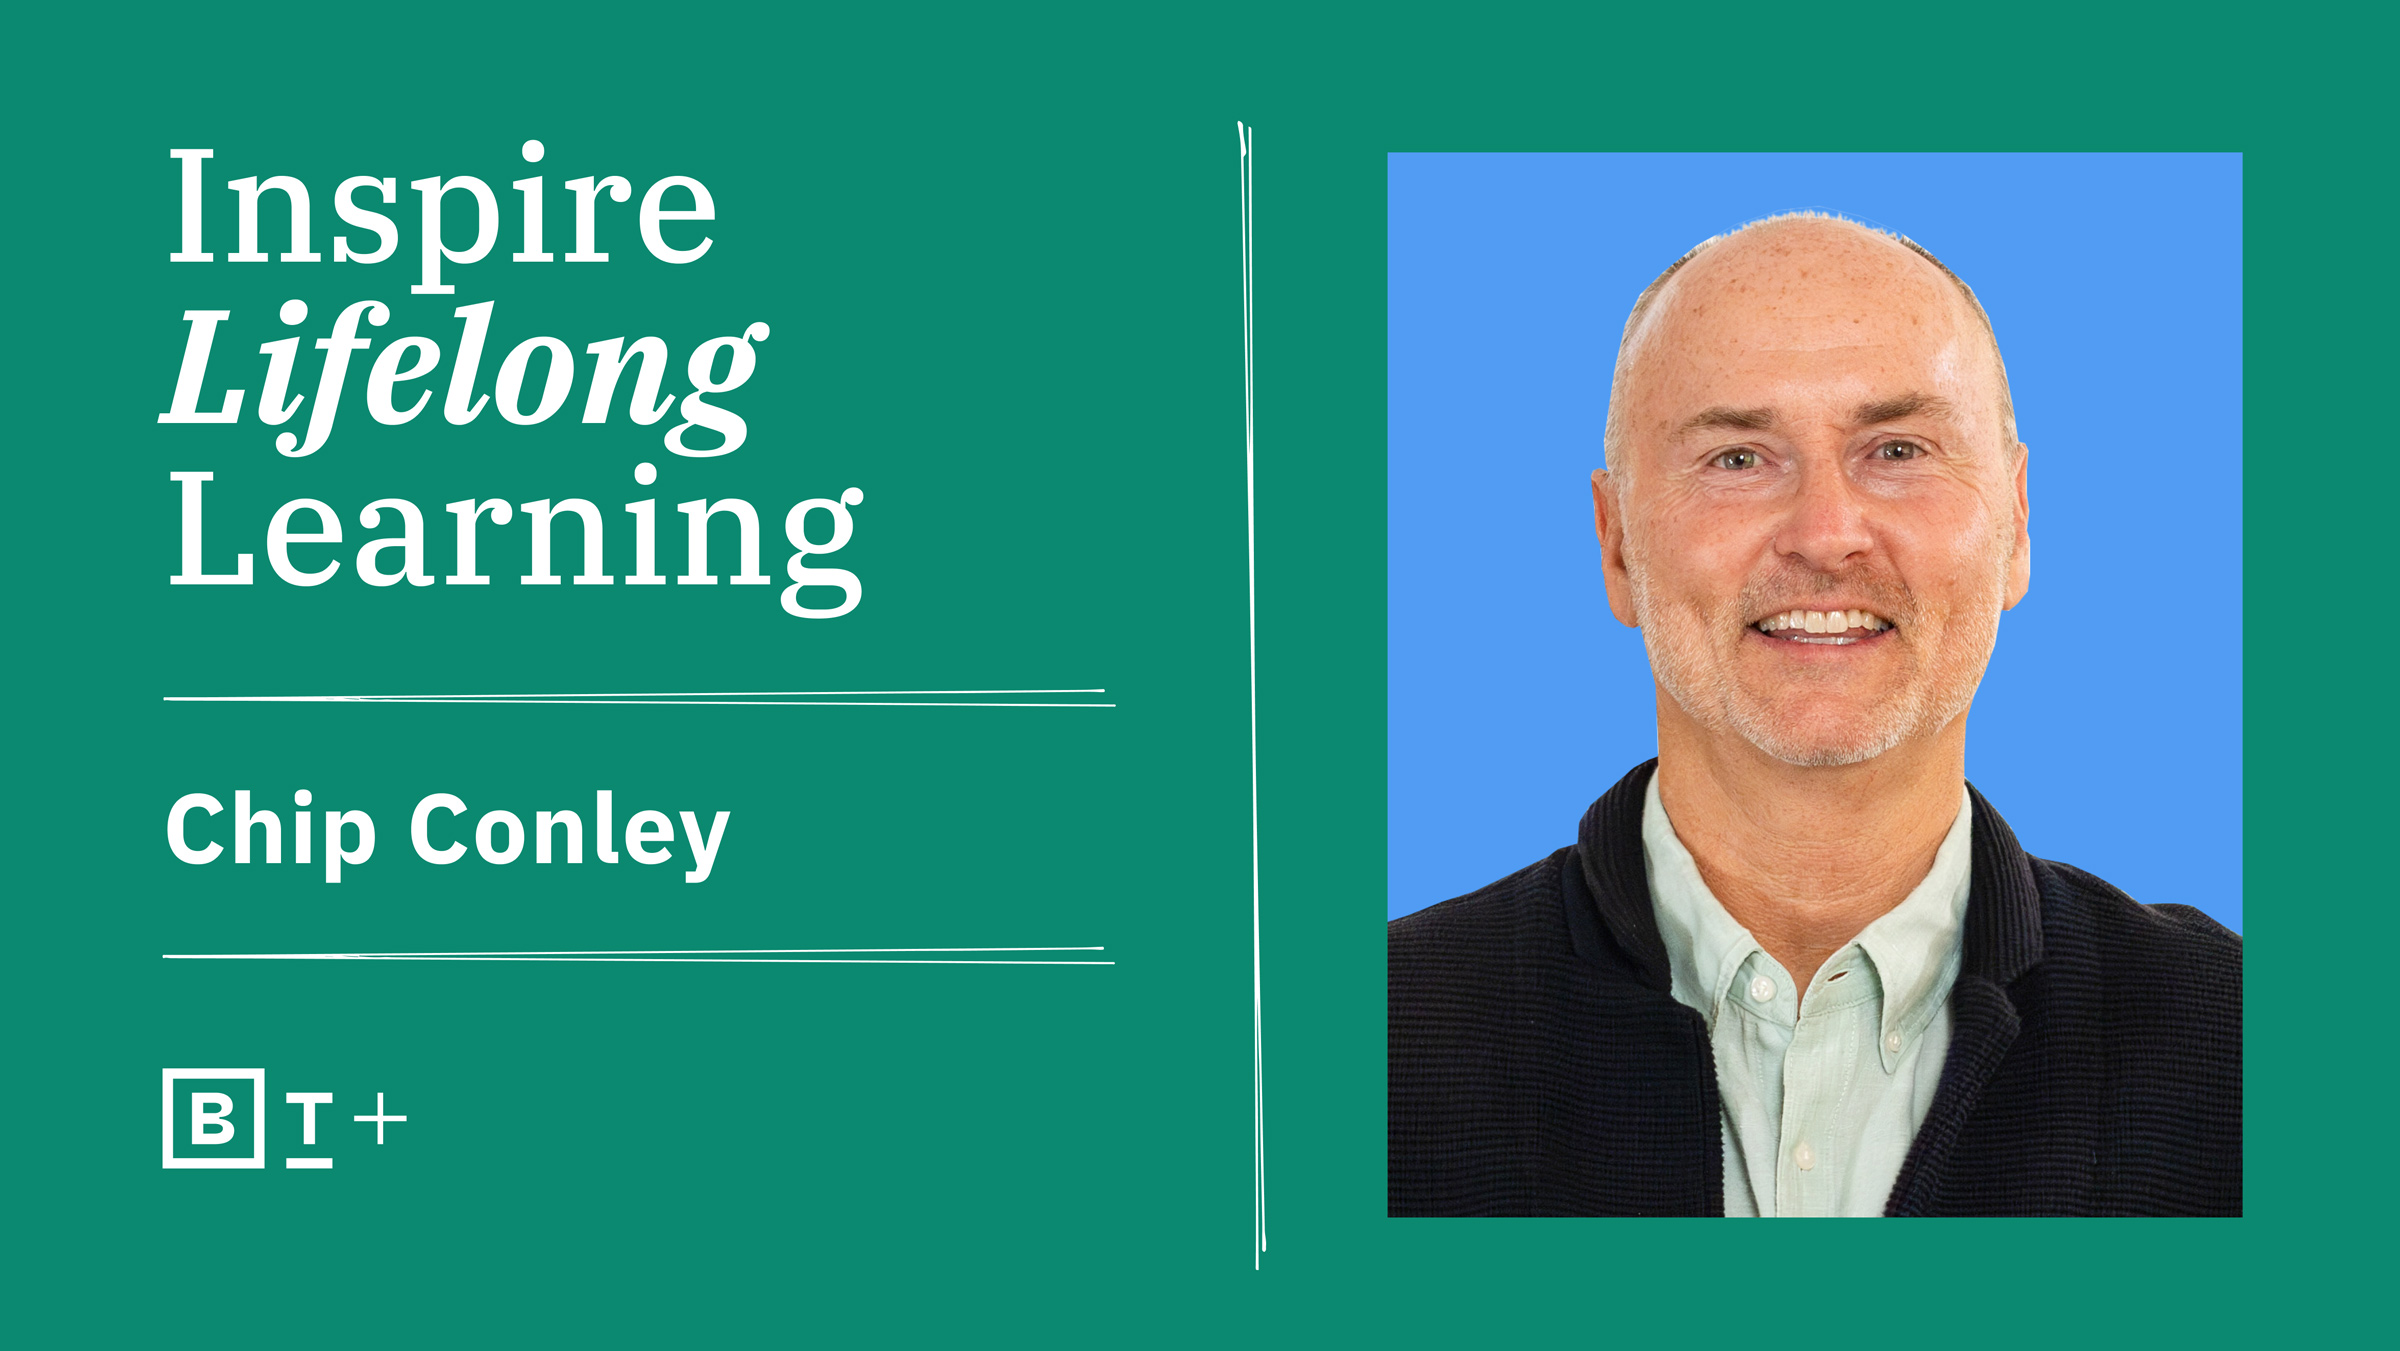 Chip conley inspire lifelong learning.